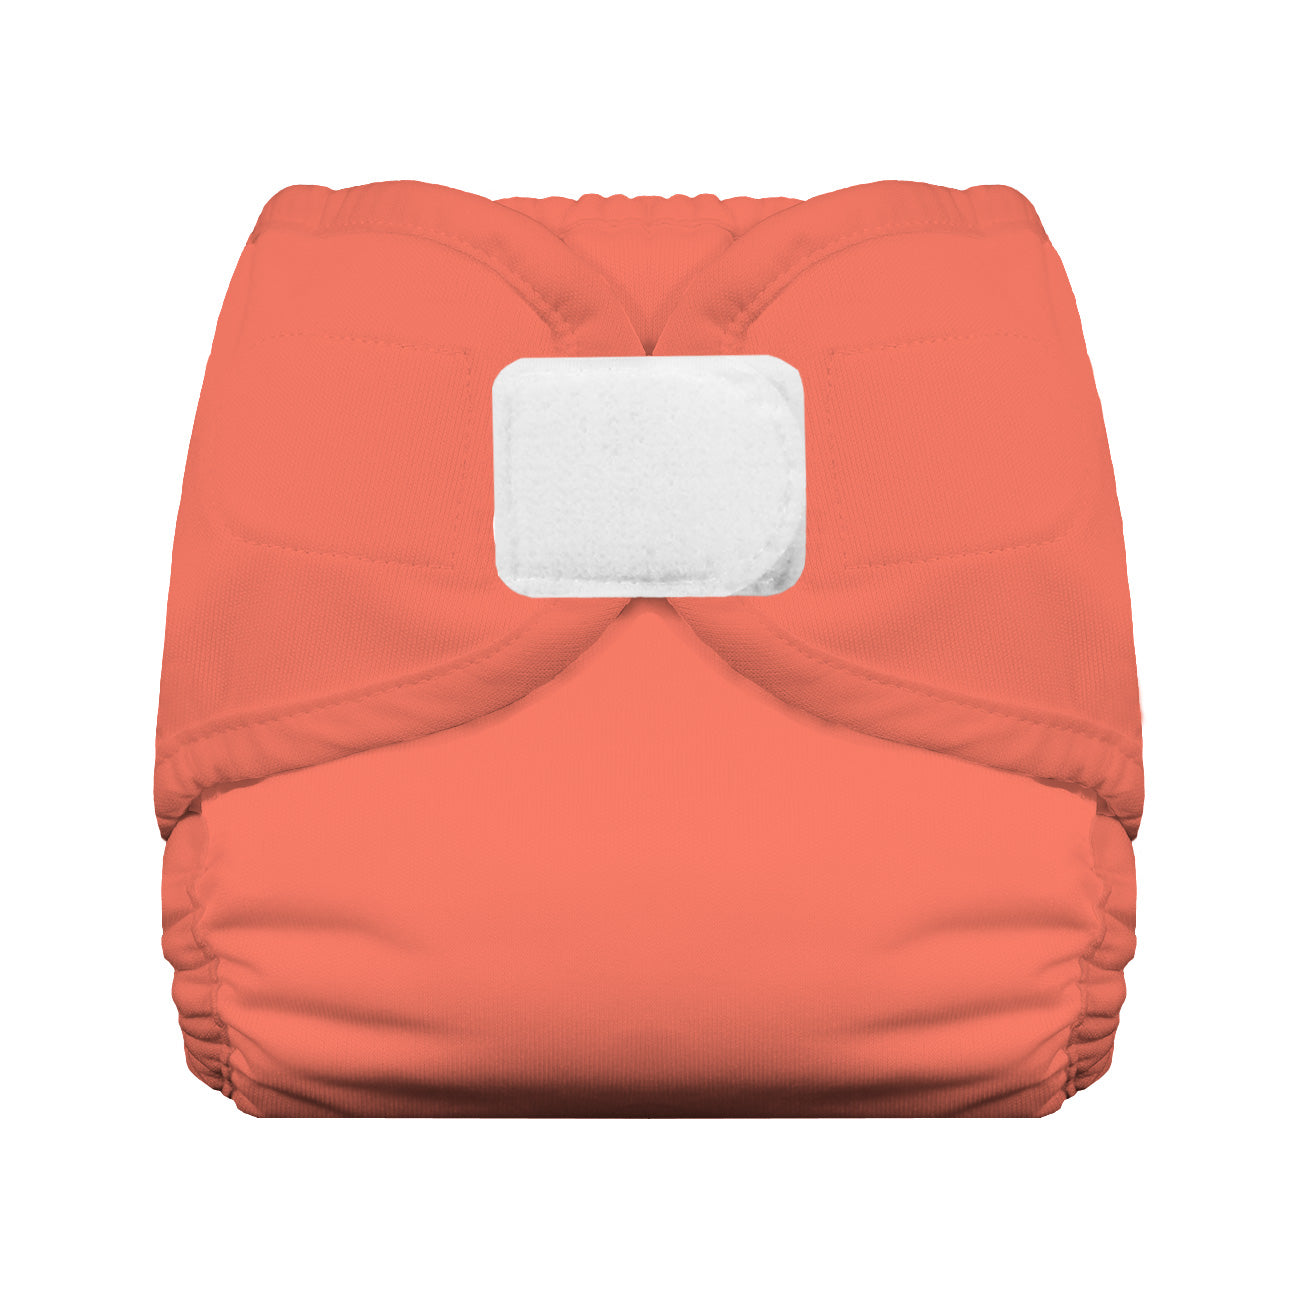 Image of Thirsties Diaper Cover with hook and loop in Salmon